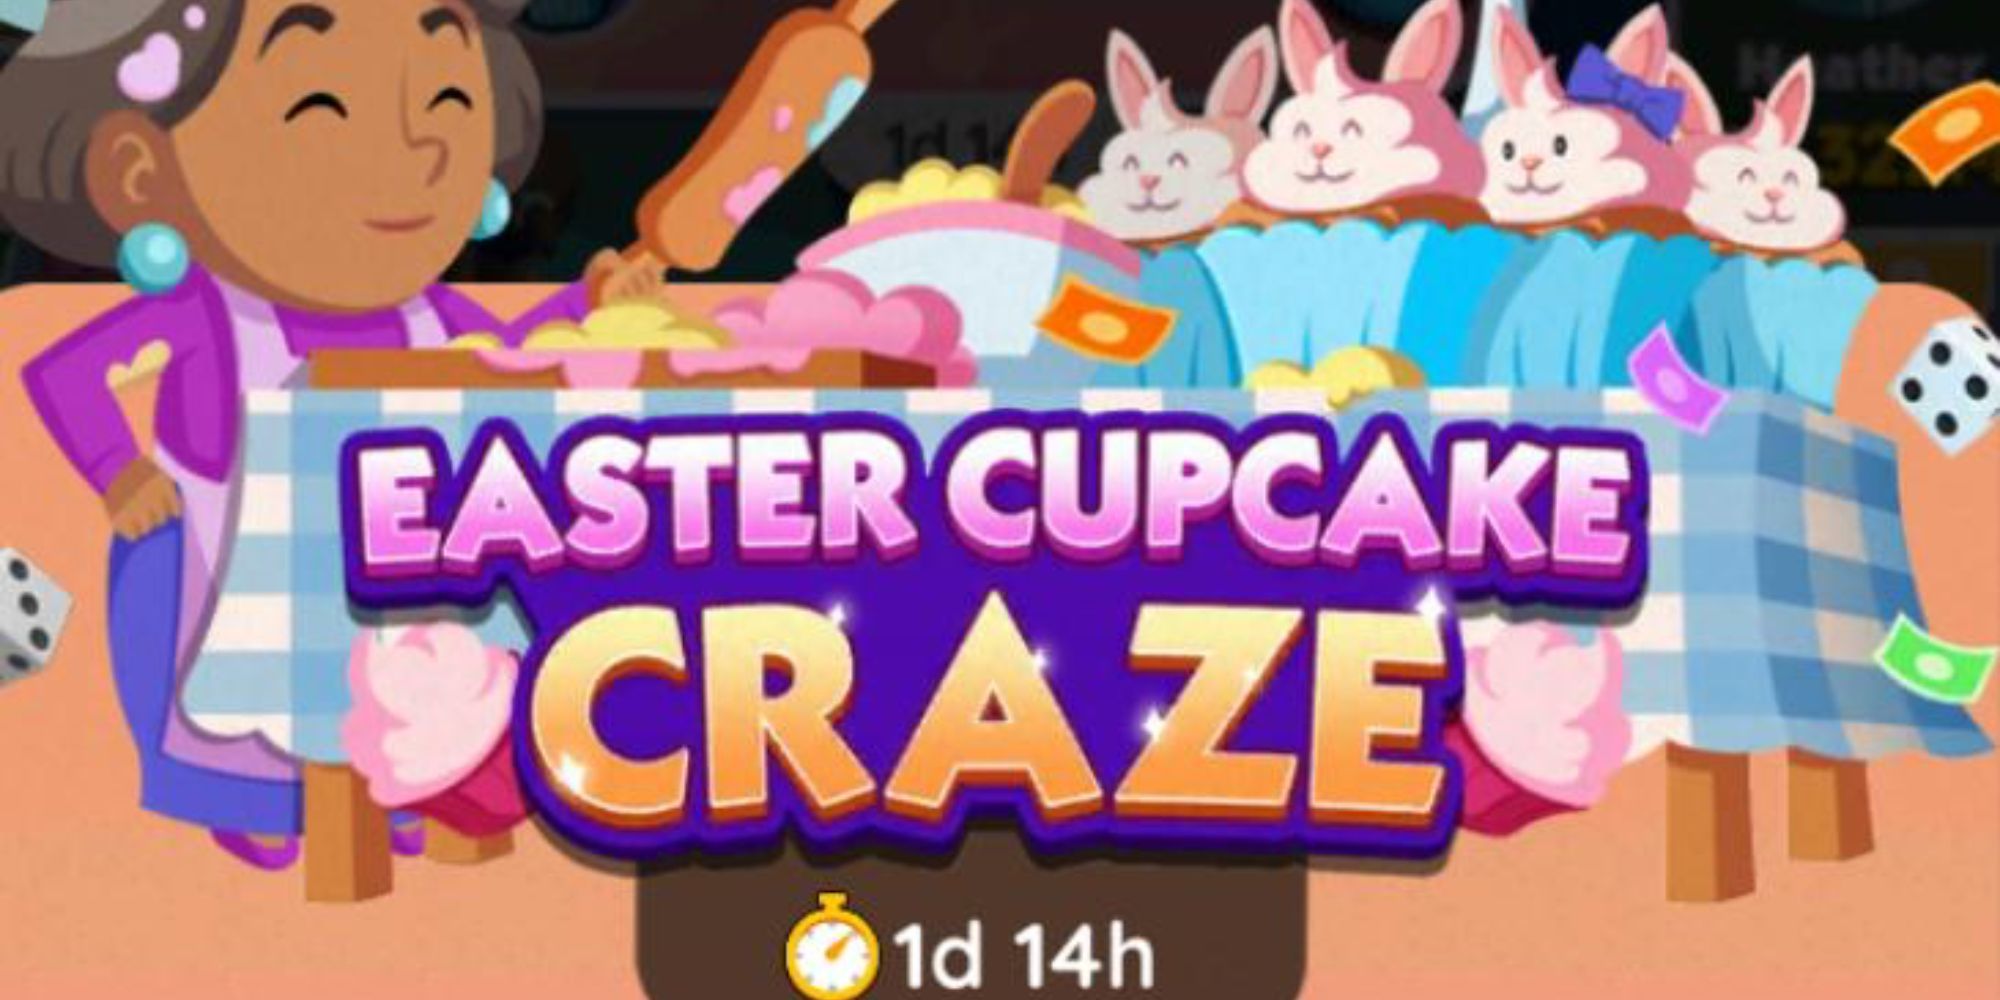 Ms. Monopoly featured in Easter Cupcake Craze event banner in Monopoly Go.